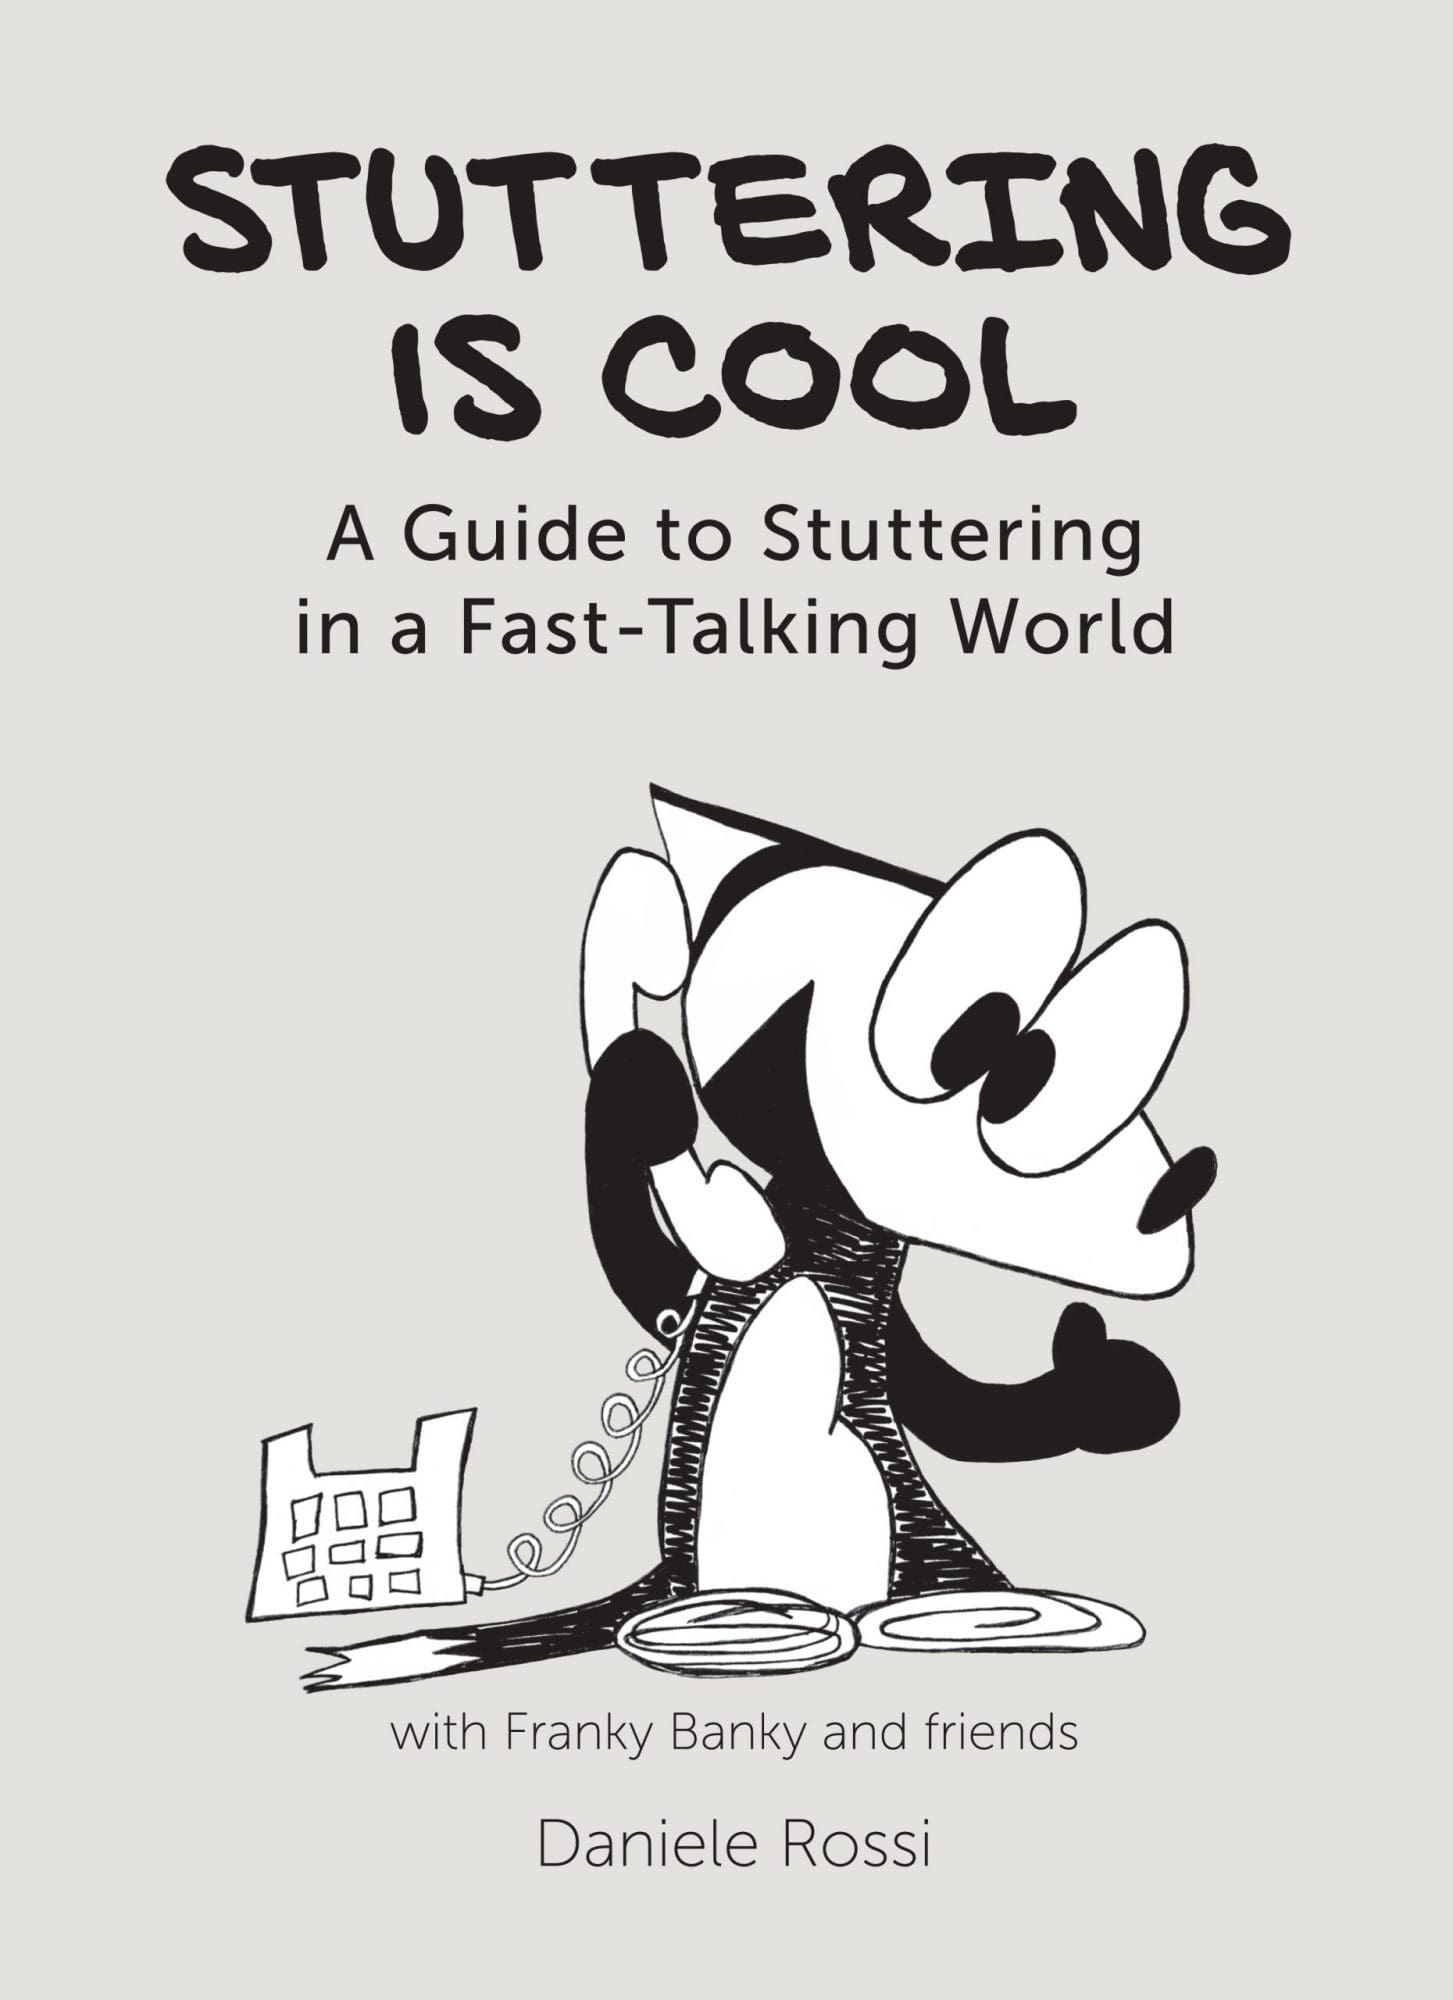 A book cover titled "Stuttering Is Cool" shows an illustrated cartoon cat in black and white, holding a microphone, standing confidently. below, small buildings are depicted, and the author's name "franky banky and friends" is included.